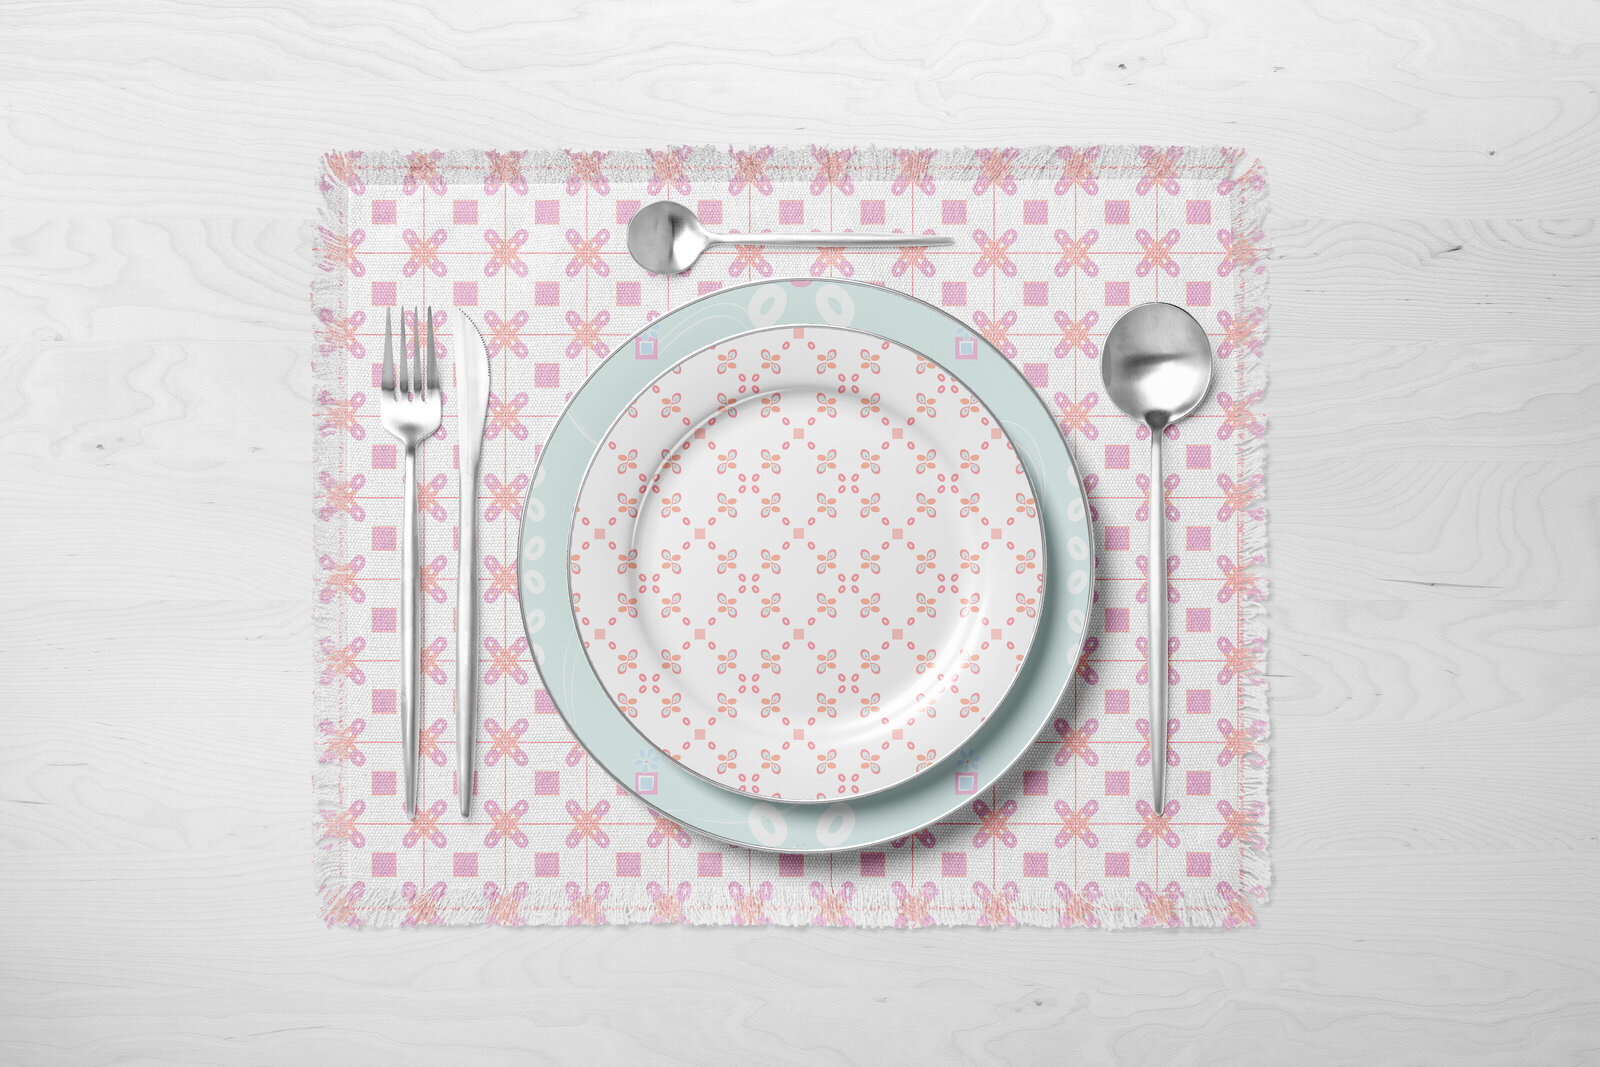 pink and white patterned placemat with patterned dishes